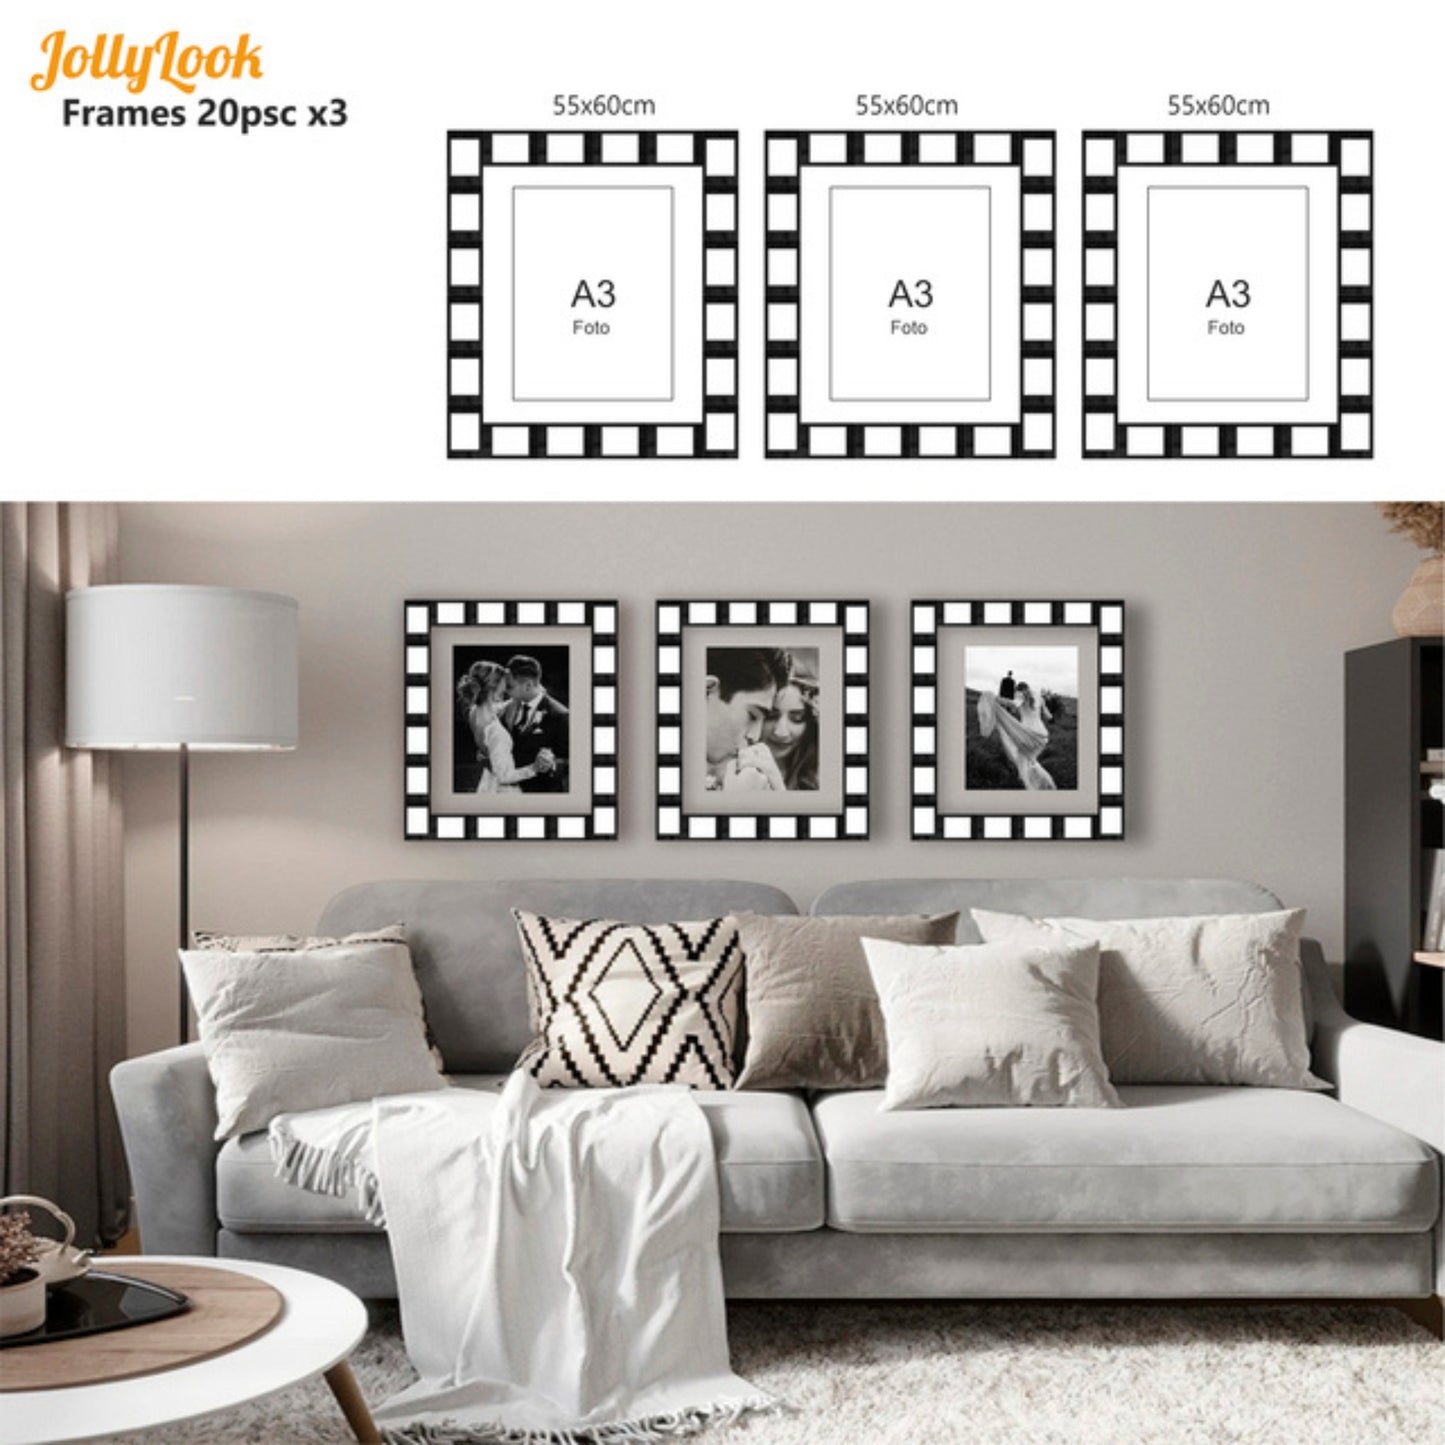 Interior display of DIY wooden frames in Stained Brown Color for instant Mini photos taken with a Jollylook camera. Three frames are creatively arranged on a grey wall